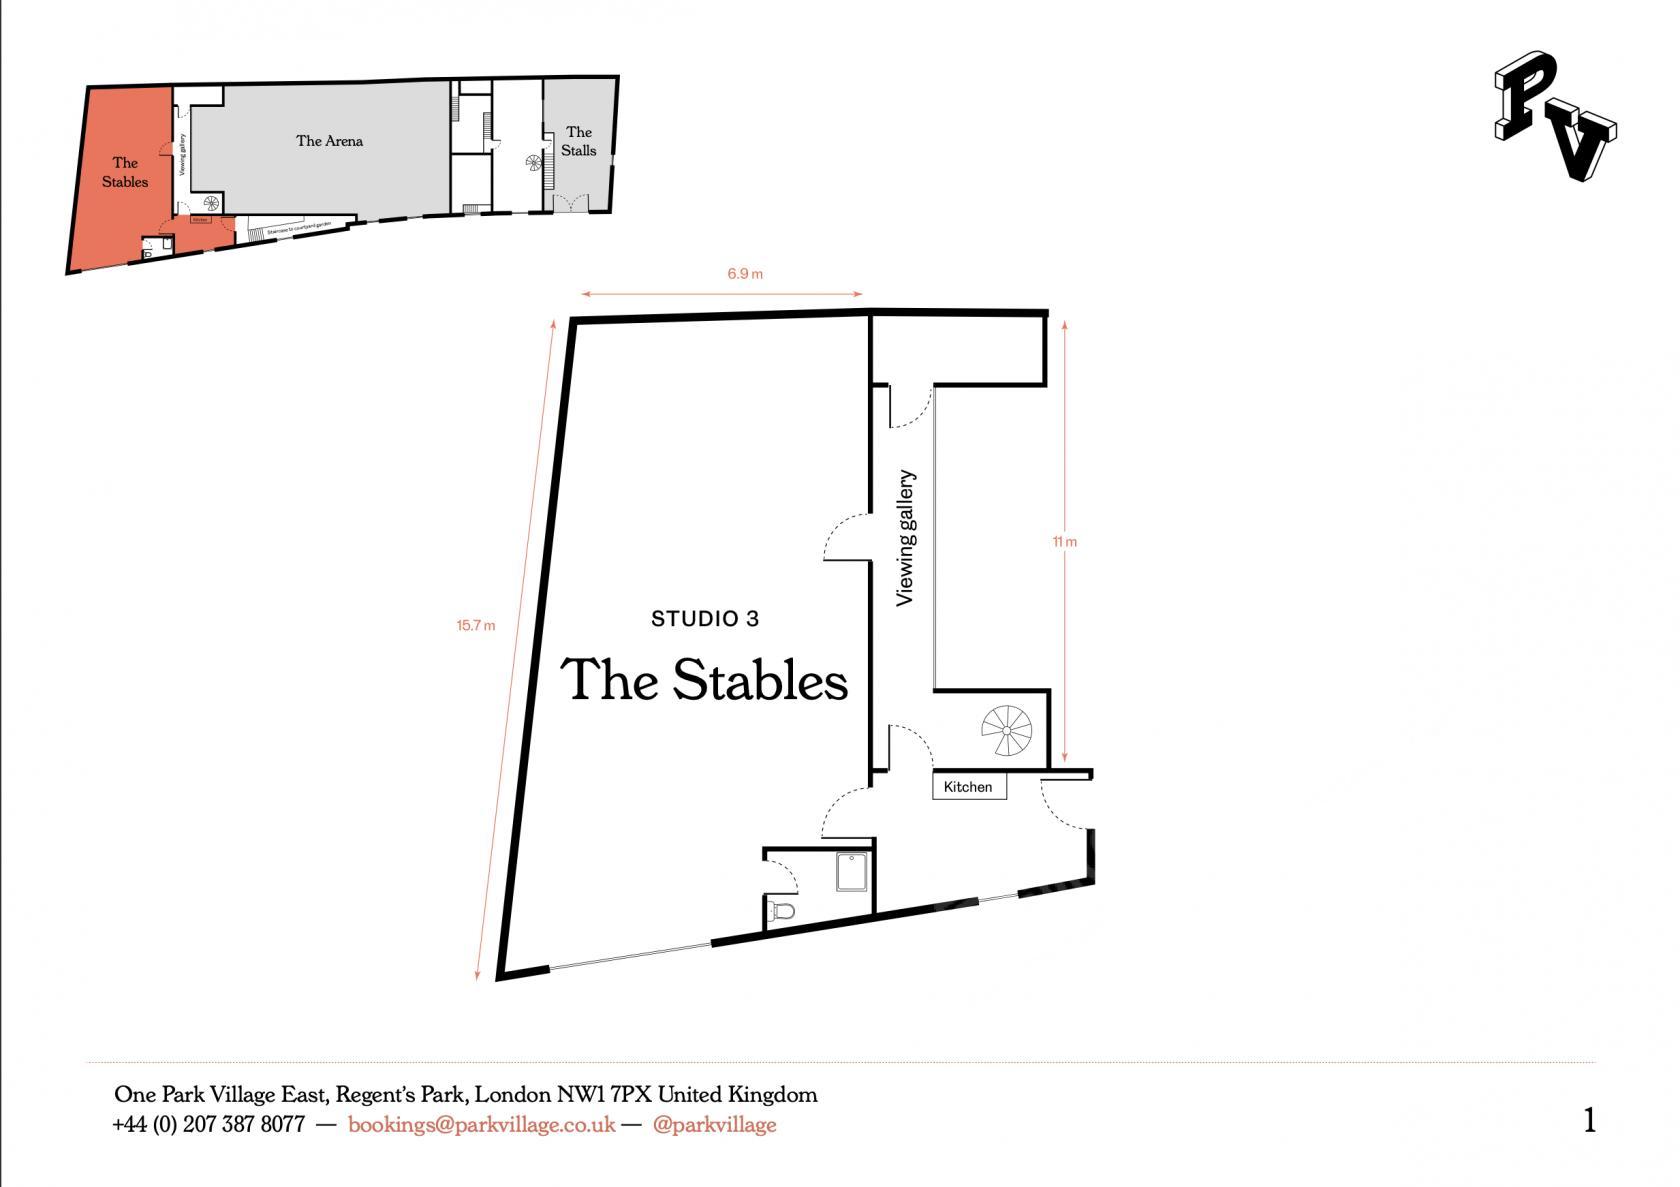 The Stables (Studio 3)